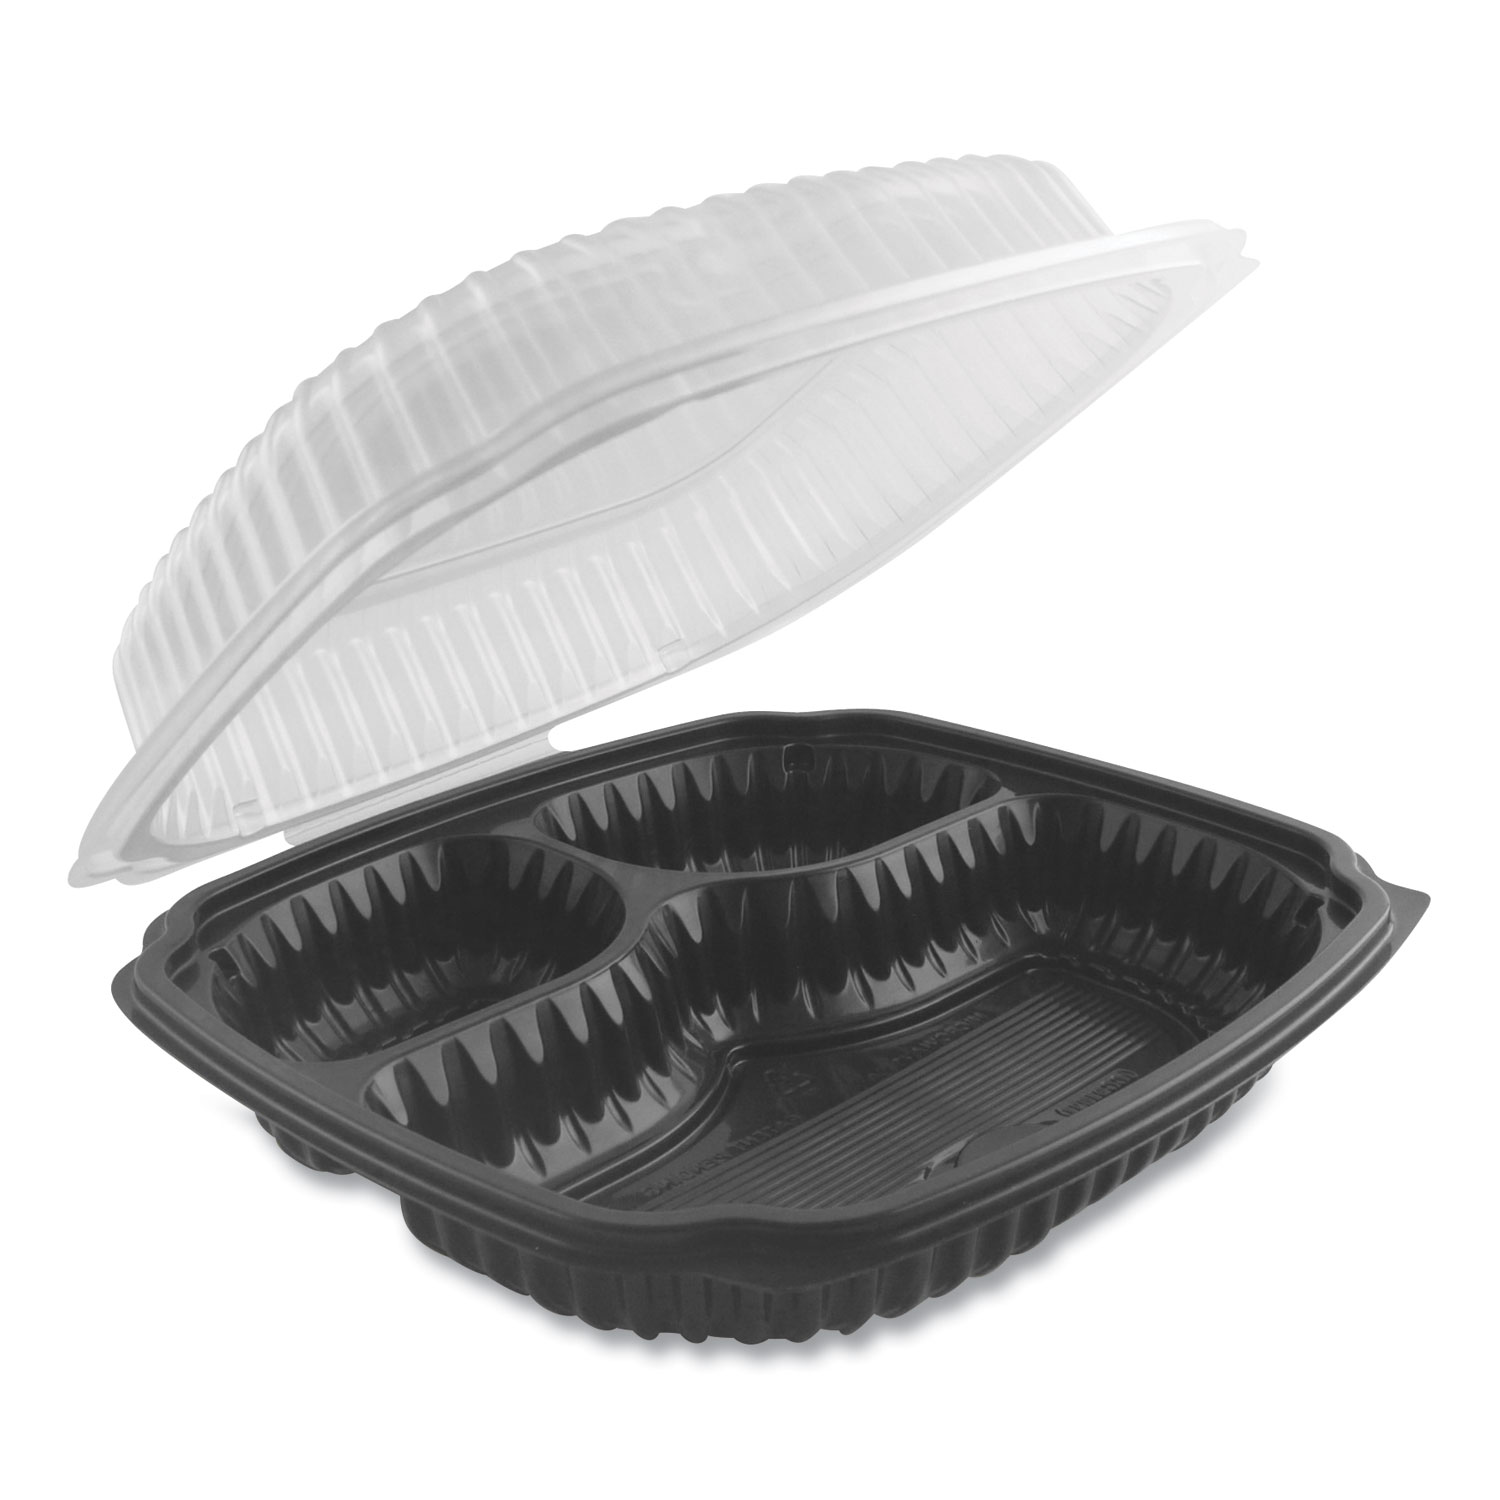 Culinary Lites Microwavable 3-Compartment Container, 26 oz/7 oz/7